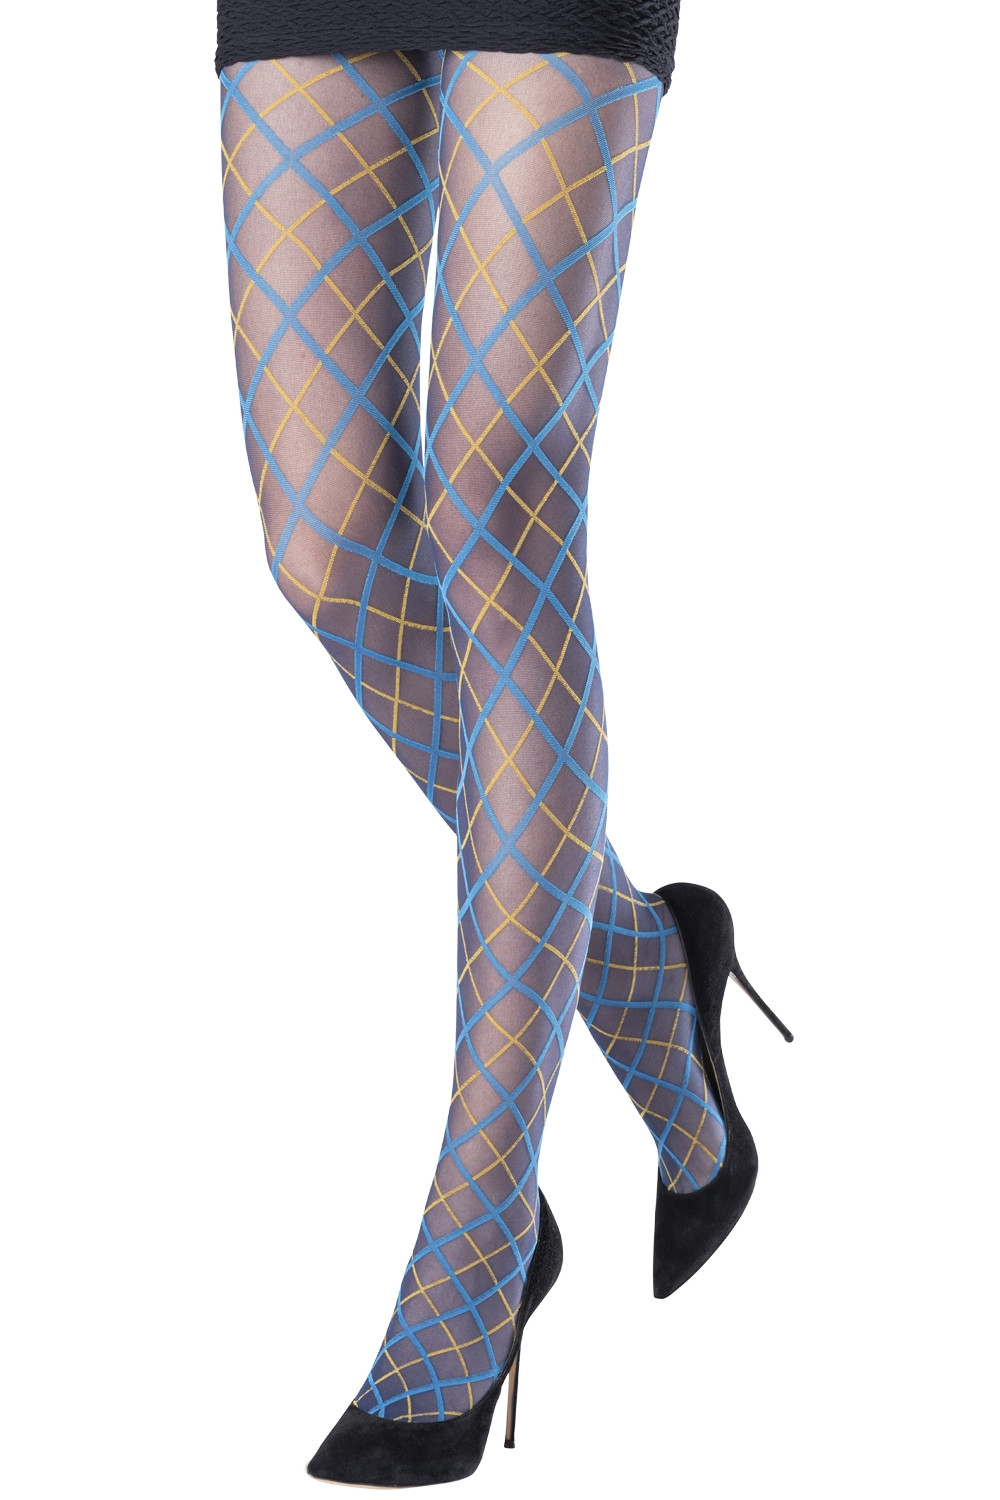 tights patterned colours – Blue Steel Equestrian